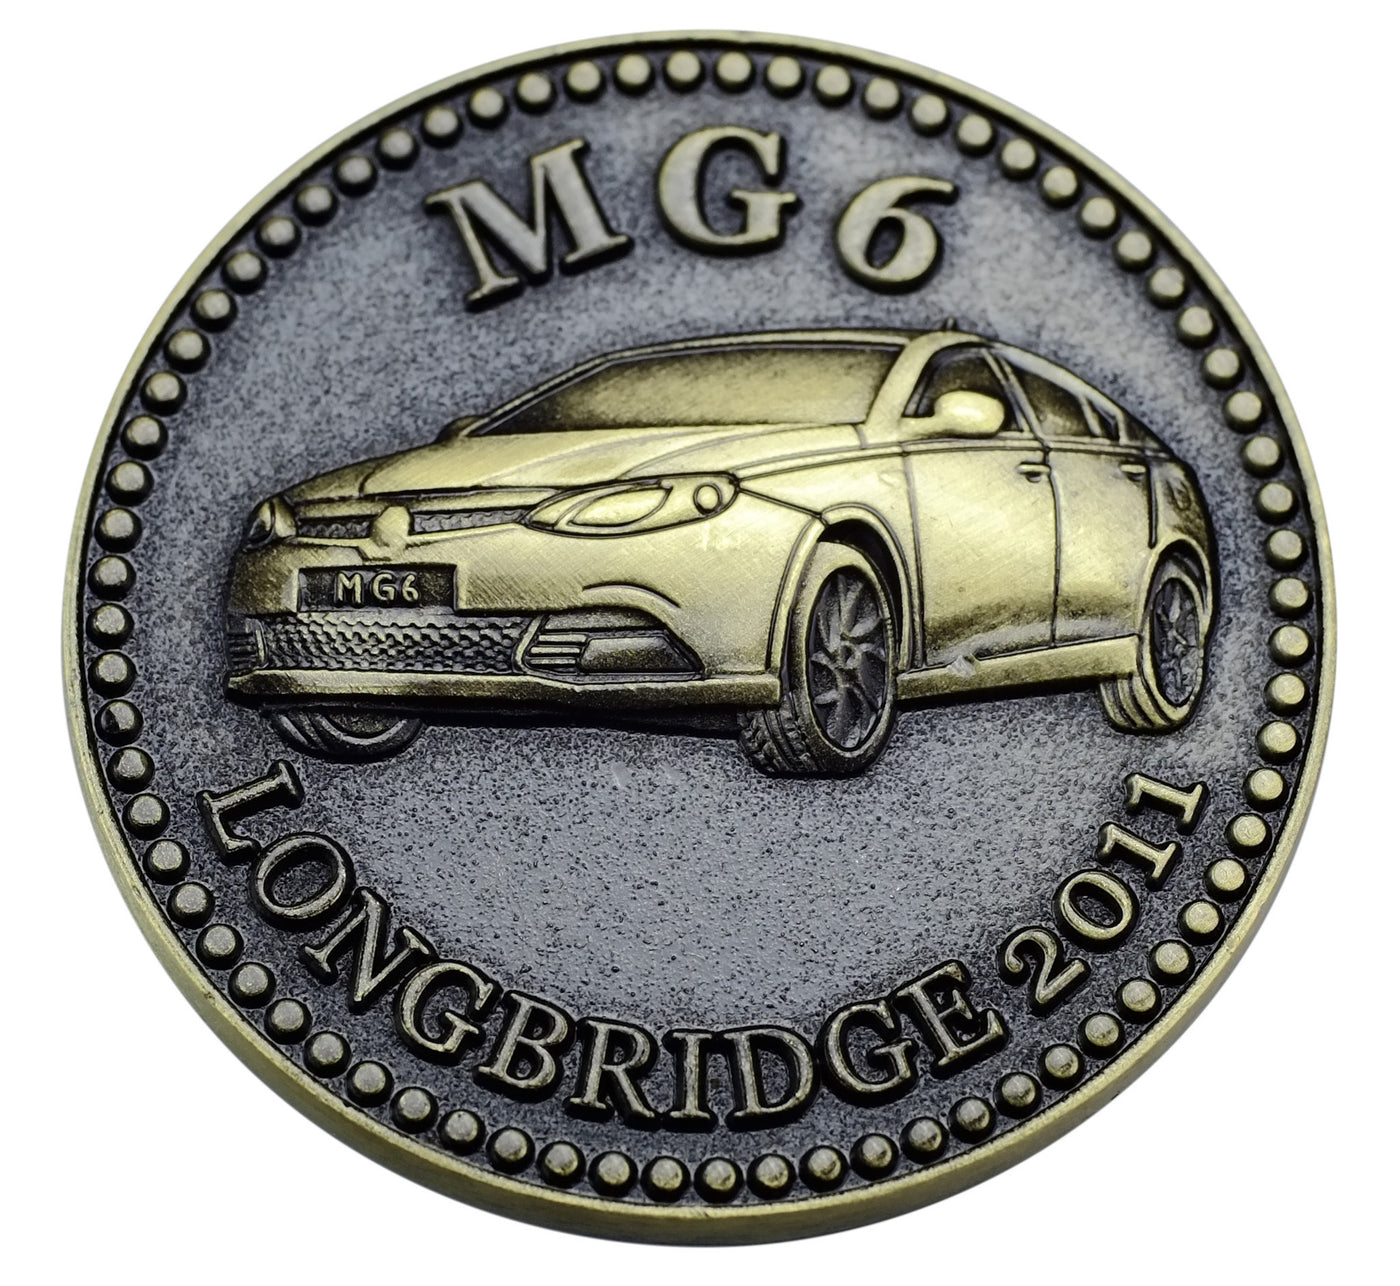 MG Commemorative Coins